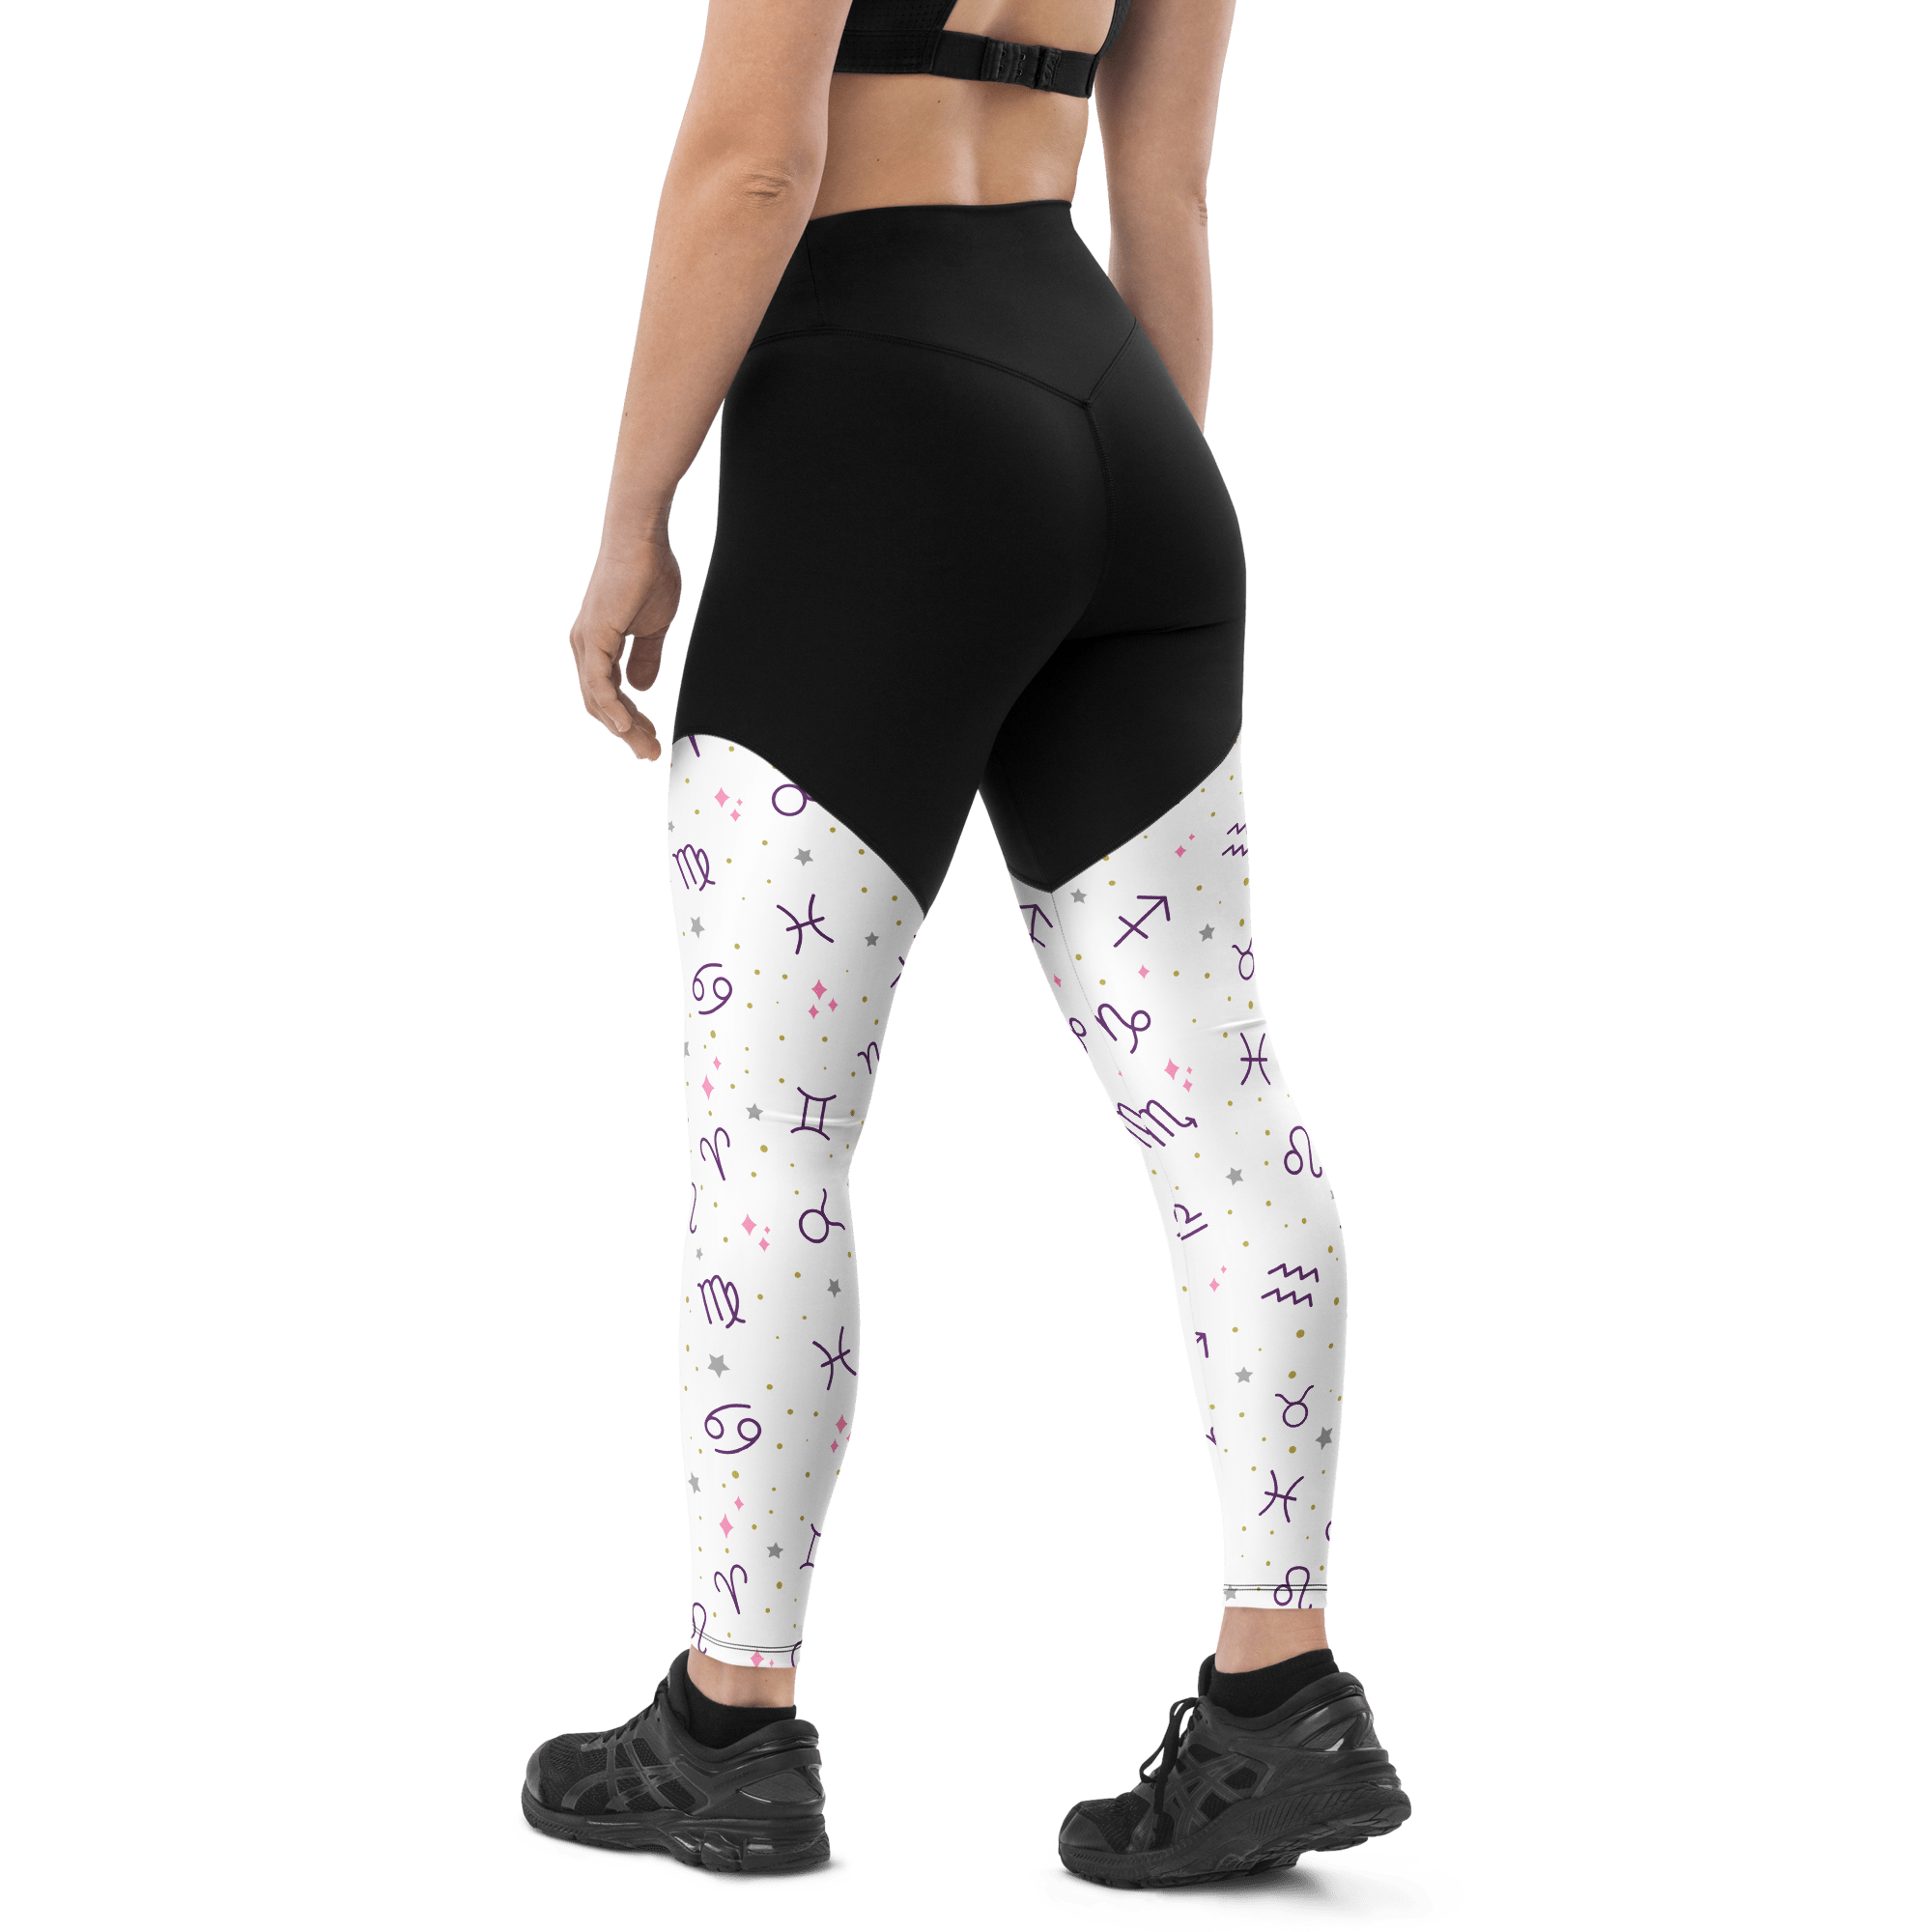 Buy Akkad Kuti Mens One Leg Compression Tights for Basketball Gym Sport  Leggings 3/4 Compression Pants with Pockets, White, Small at Amazon.in